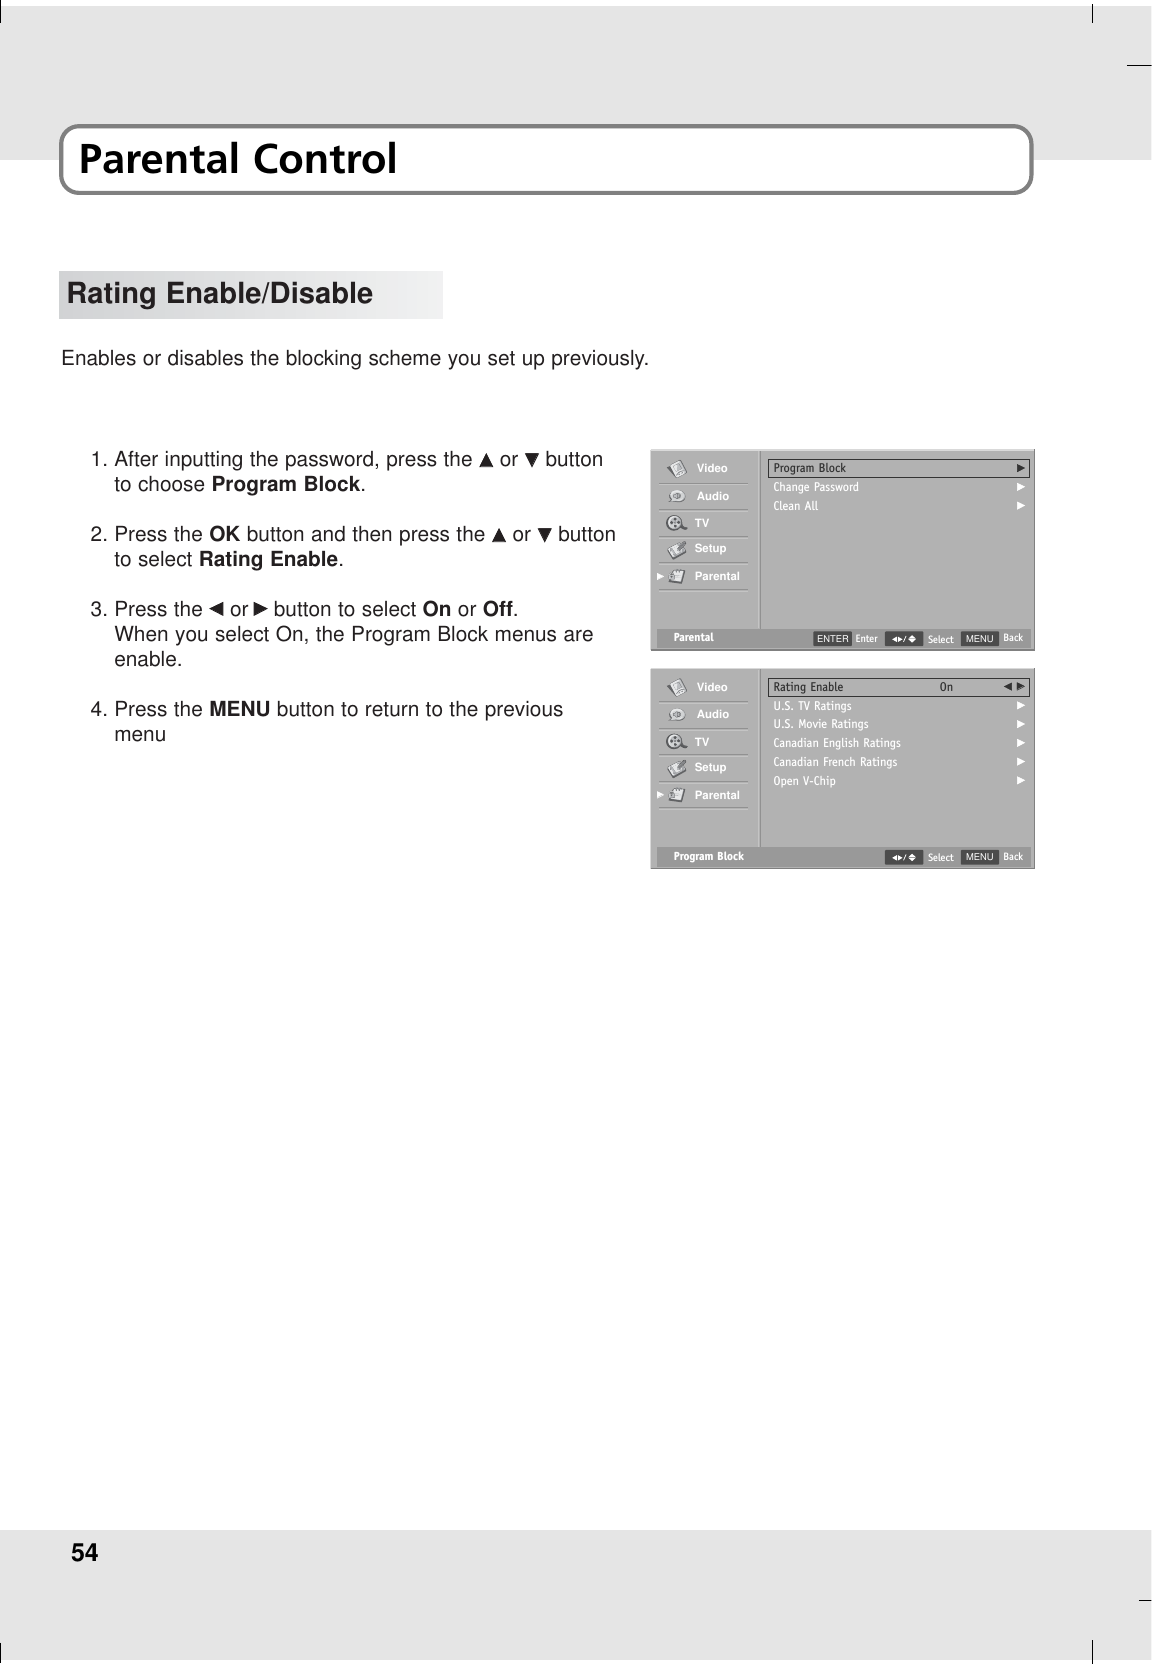 54Rating Enable/DisableEnables or disables the blocking scheme you set up previously.1. After inputting the password, press the DDor EEbuttonto choose Program Block.2. Press the OK button and then press the DDor EEbuttonto select Rating Enable.3. Press the FFor GGbutton to select On or Off.When you select On, the Program Block menus areenable.4. Press the MENU button to return to the previousmenuParental MENU BackSelectProgram BlockChange PasswordClean AllGGGVideoAudioTVSetupParentalGGENTER EnterProgram Block MENU BackSelectRating EnableU.S. TV RatingsU.S. Movie RatingsCanadian English RatingsCanadian French RatingsOpen V-ChipOn F GGGGGGGVideoAudioTVSetupParentalGGParental Control